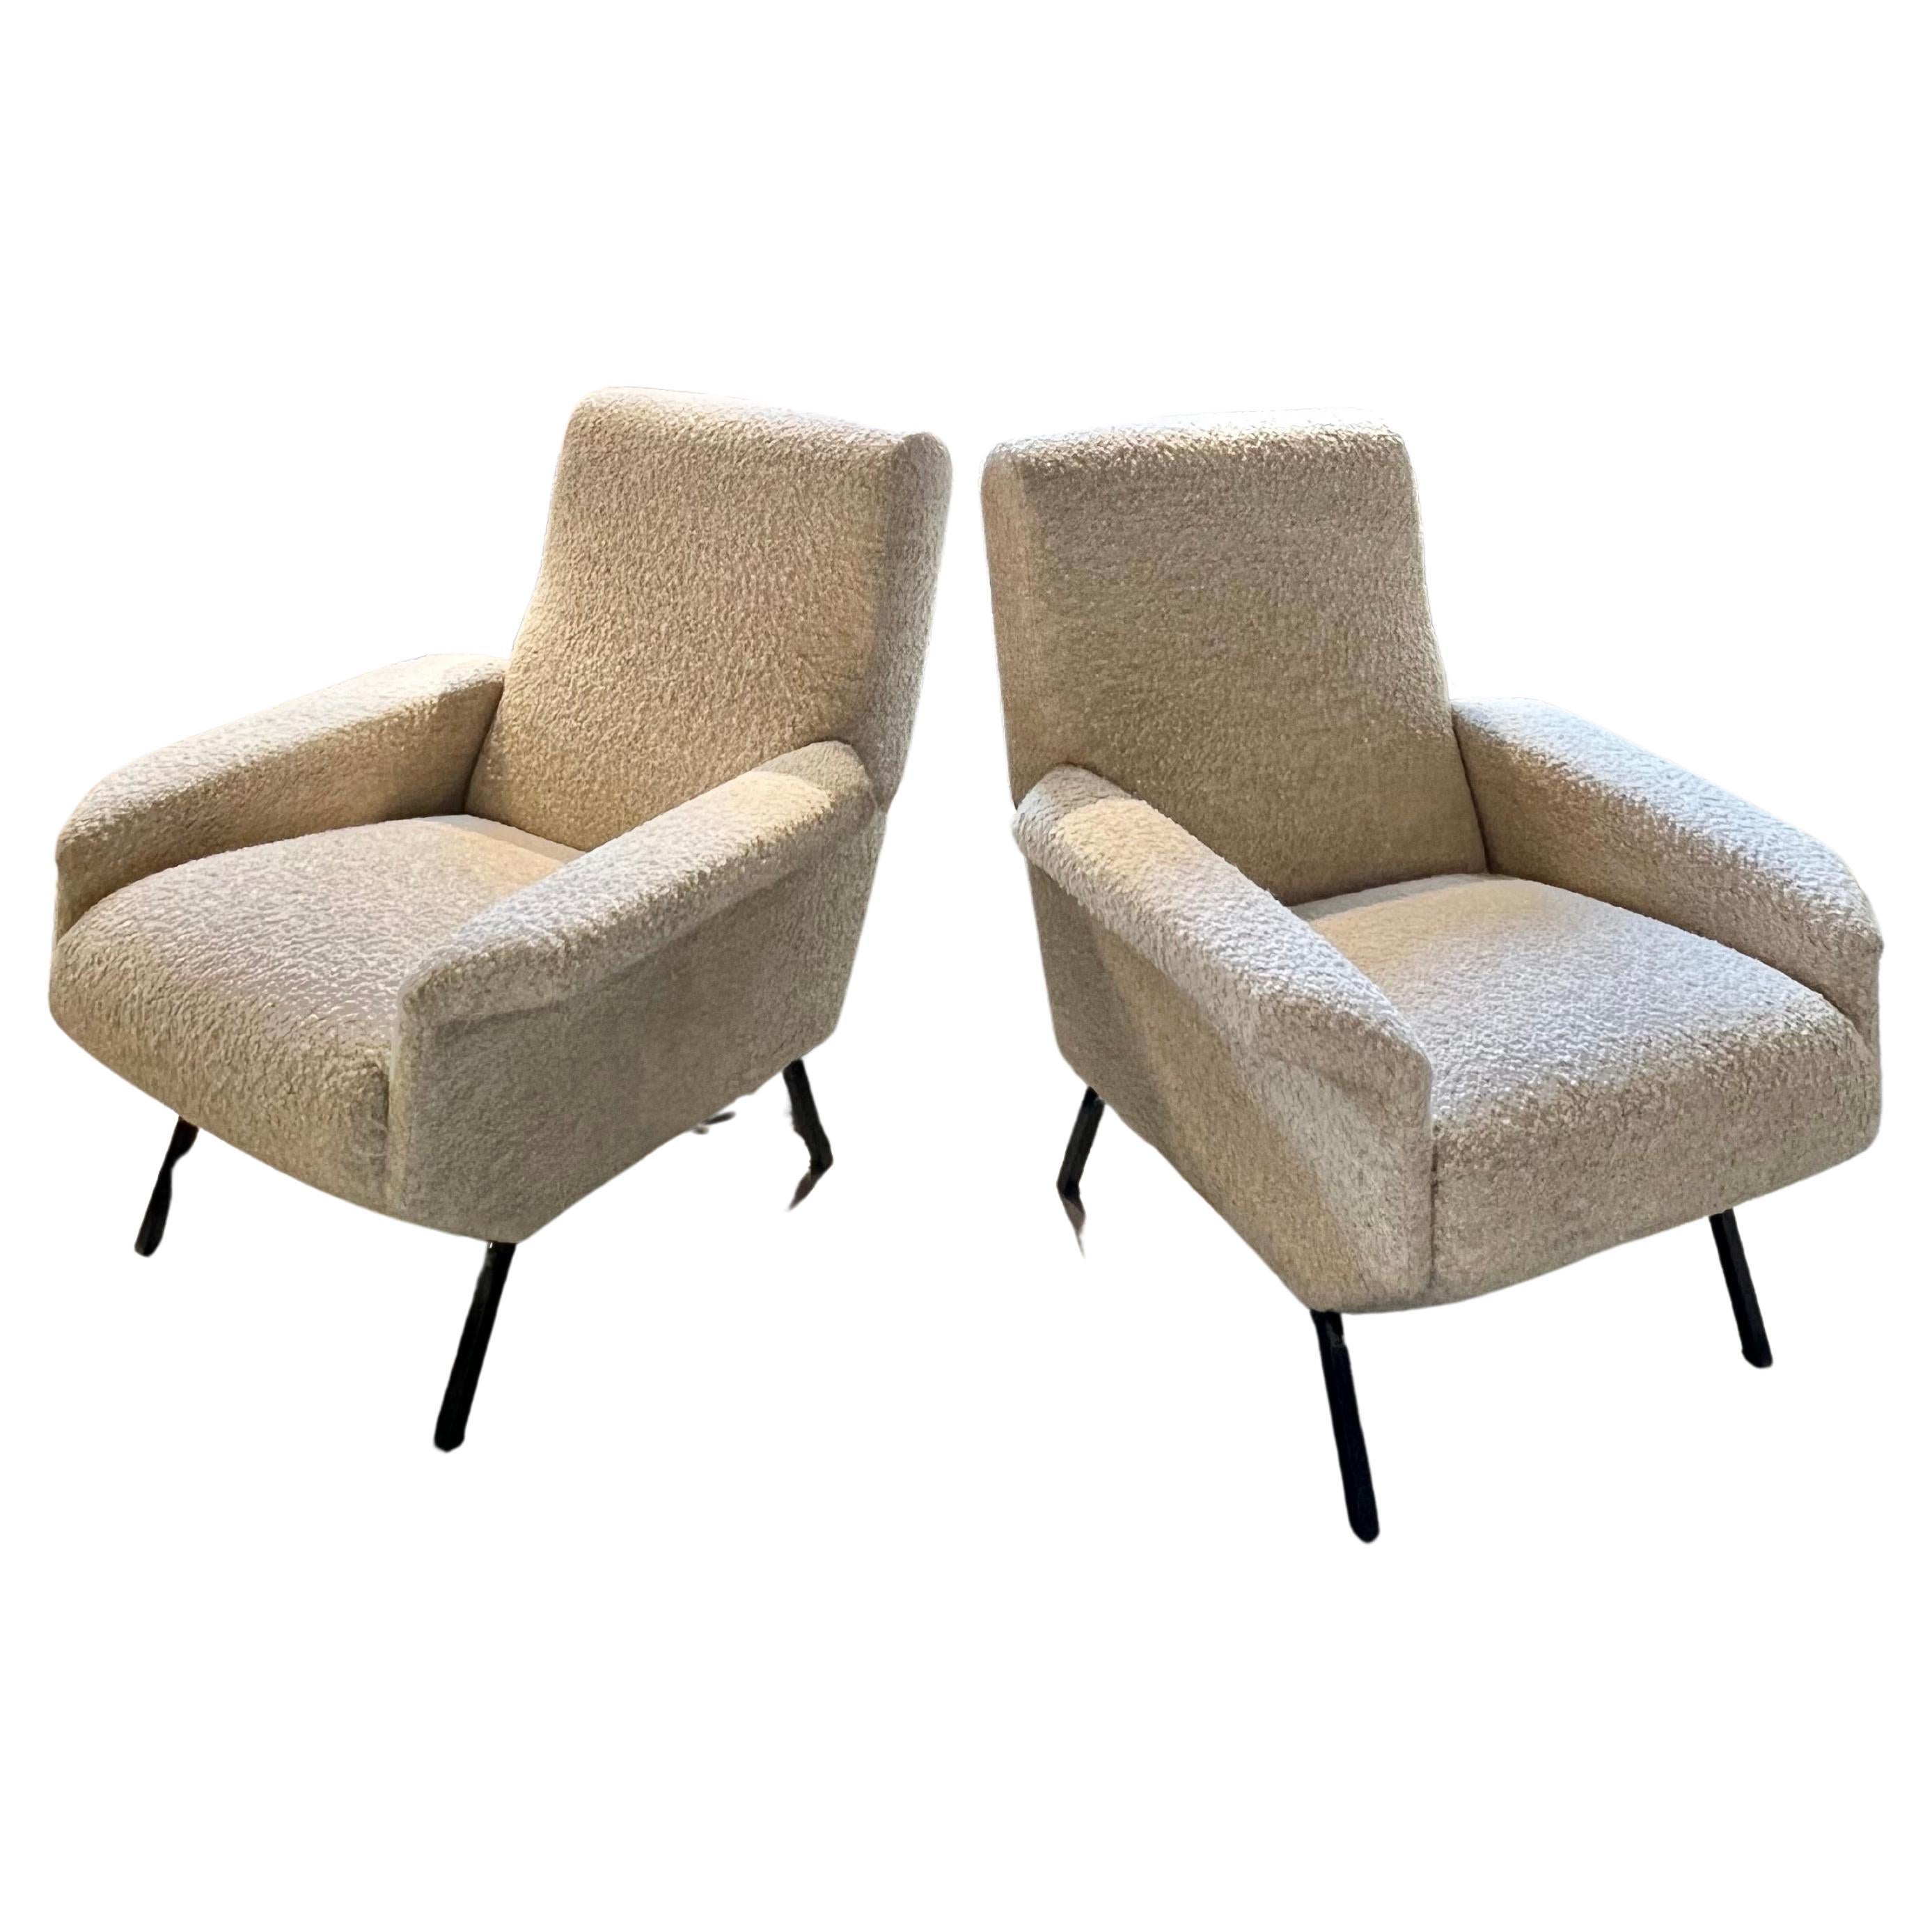 1960’s Italian Lounge Chairs  For Sale